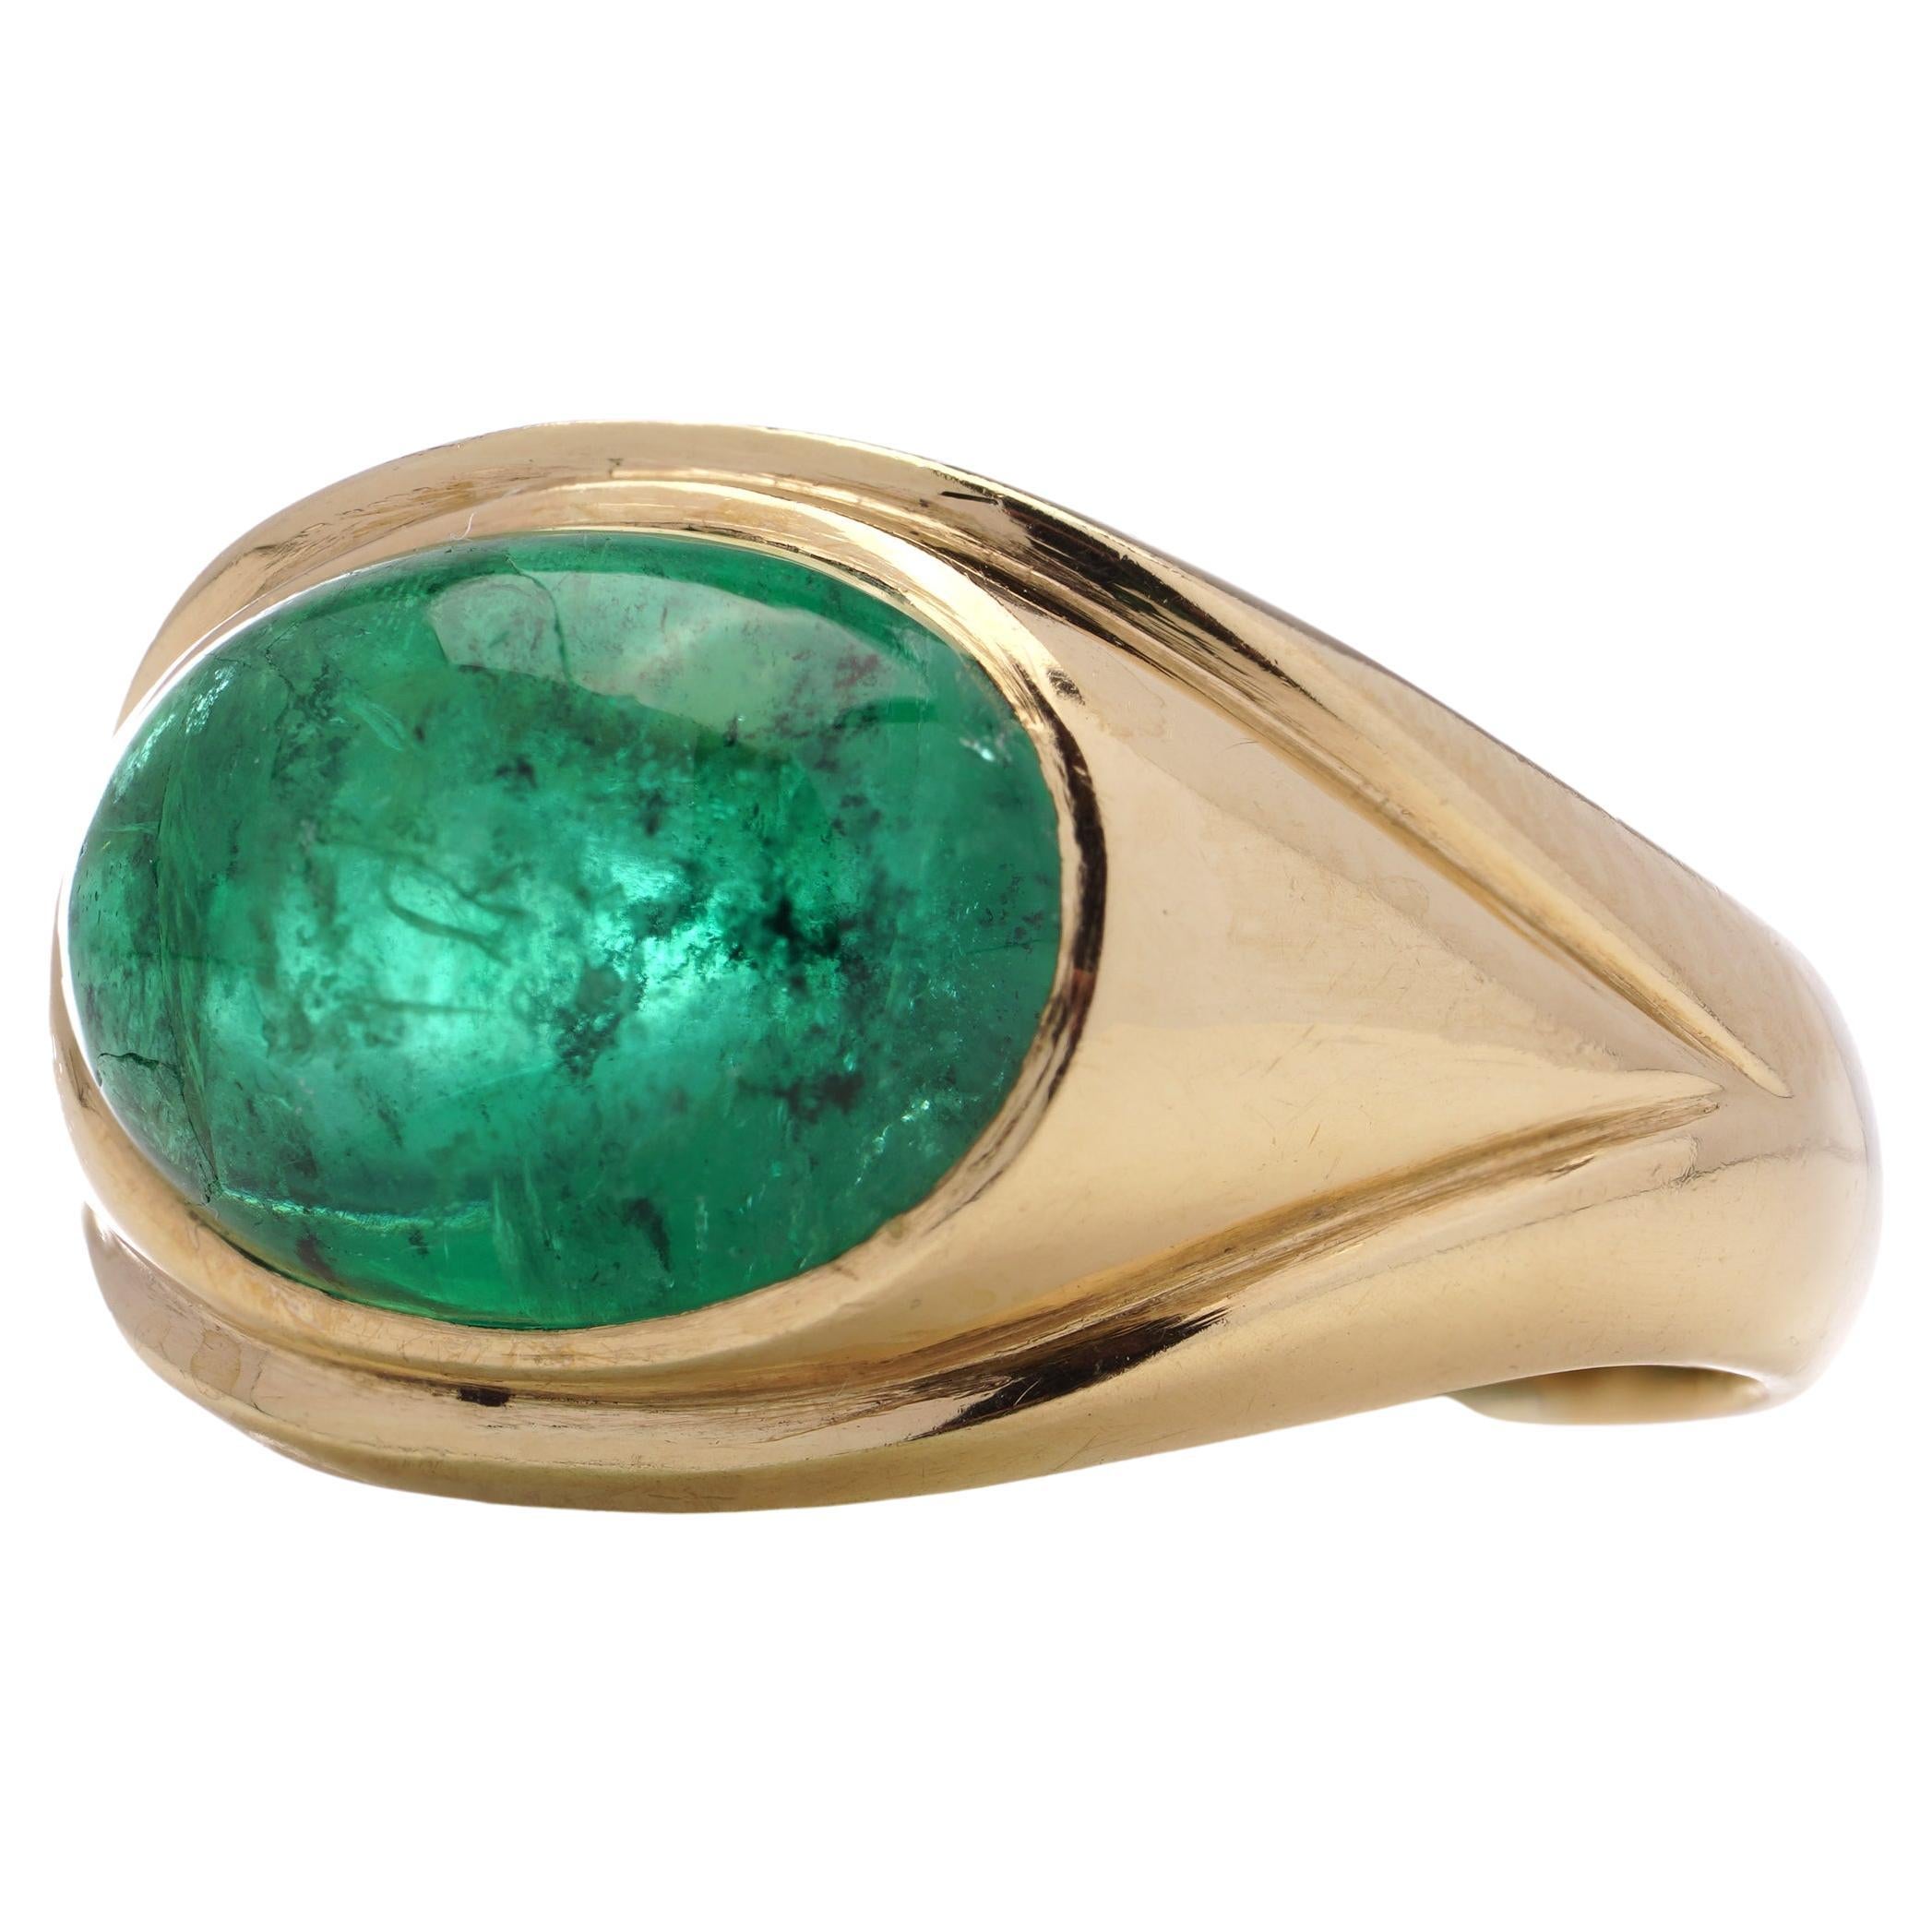 Vintage 18kt yellow gold dome ring set with oval 3.95ct. cabochon Emerald